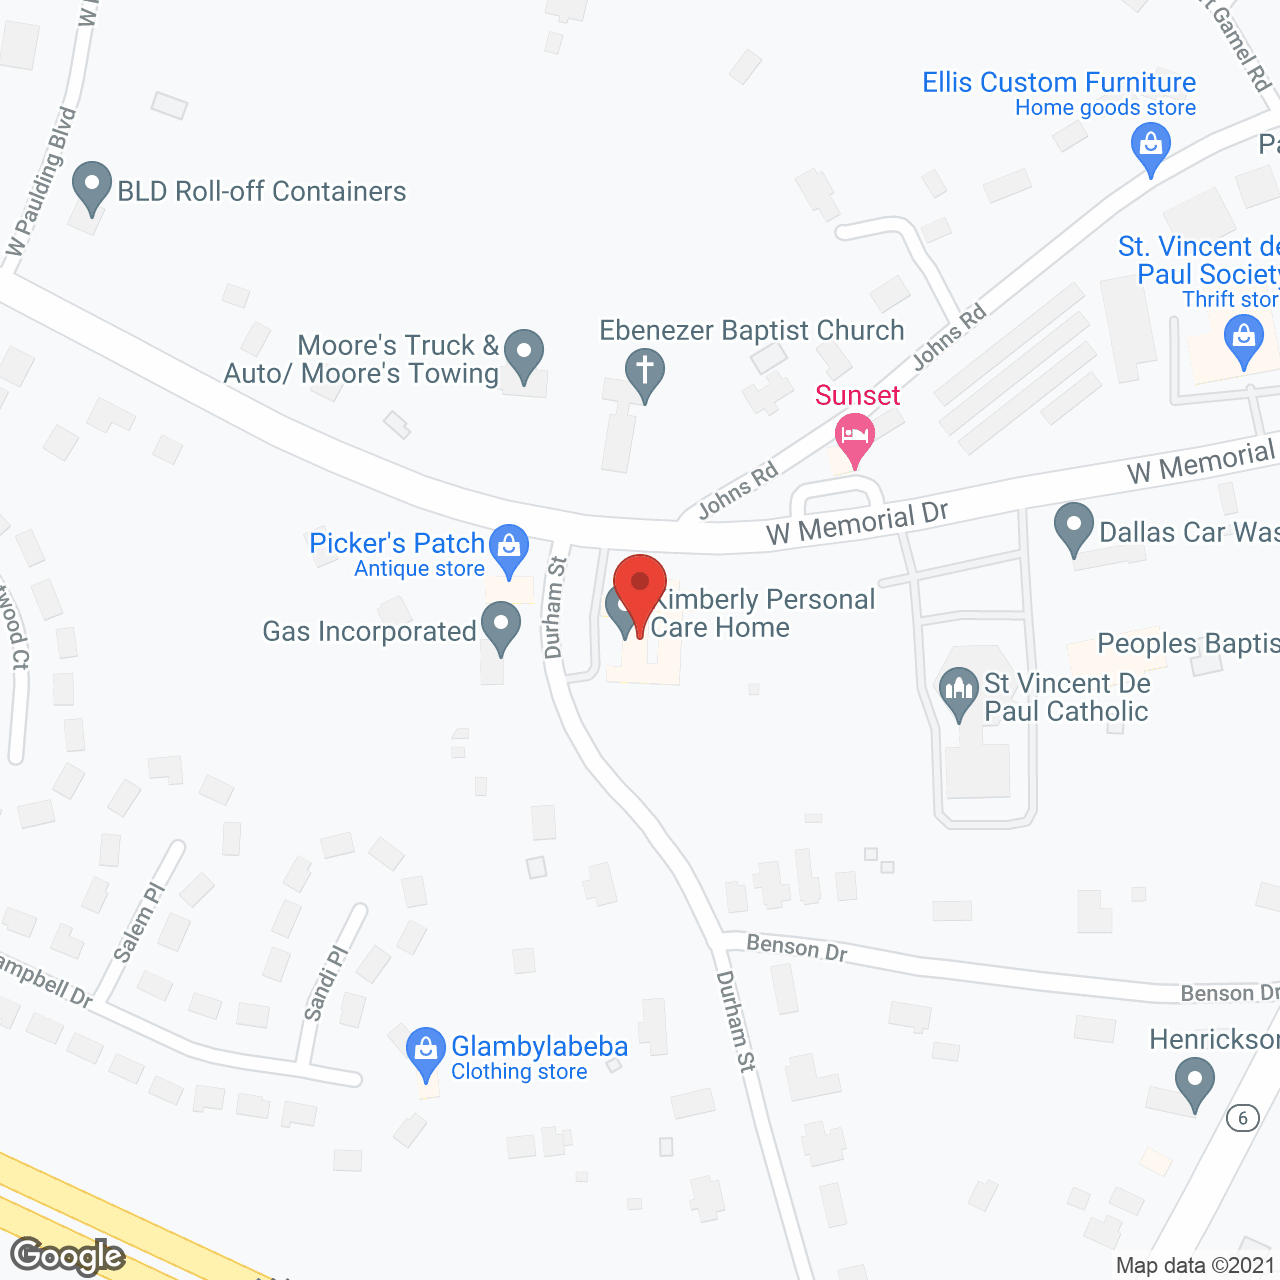 Kimberly Personal Care Home in google map